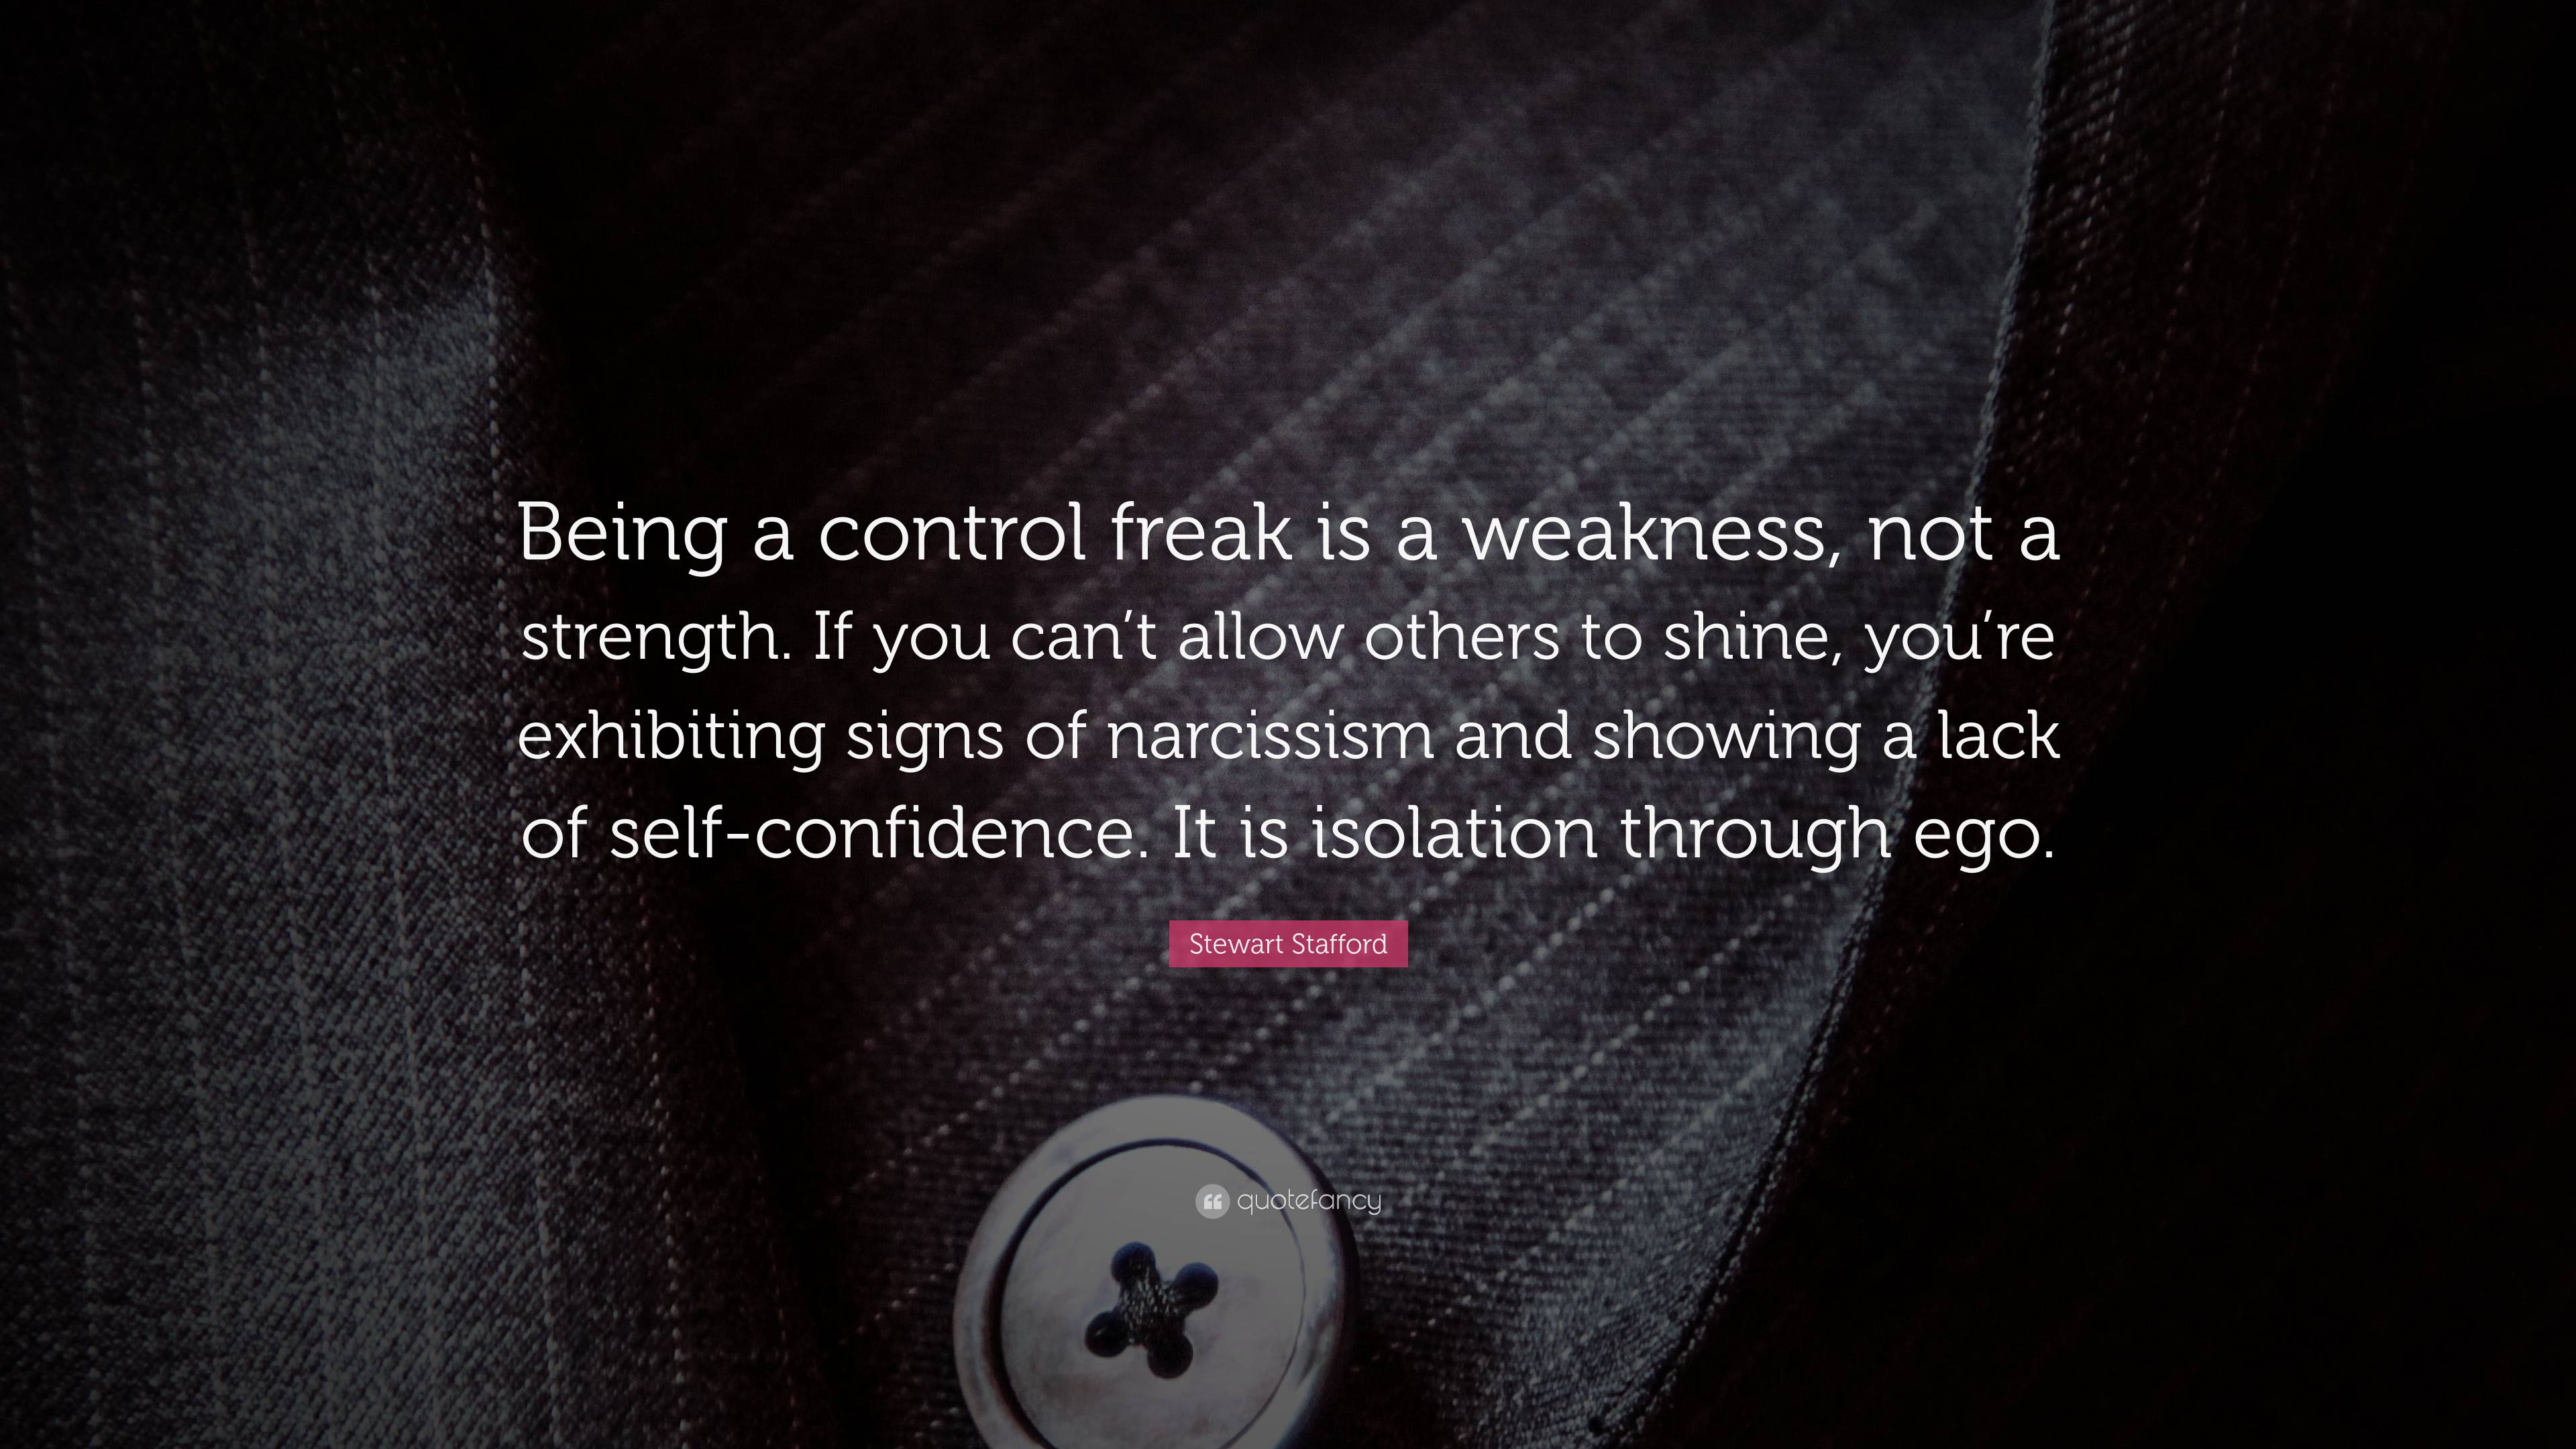 Stewart Stafford Quote: “Being a control freak is a weakness, not a  strength. If you can't allow others to shine, you're exhibiting signs of  narc”